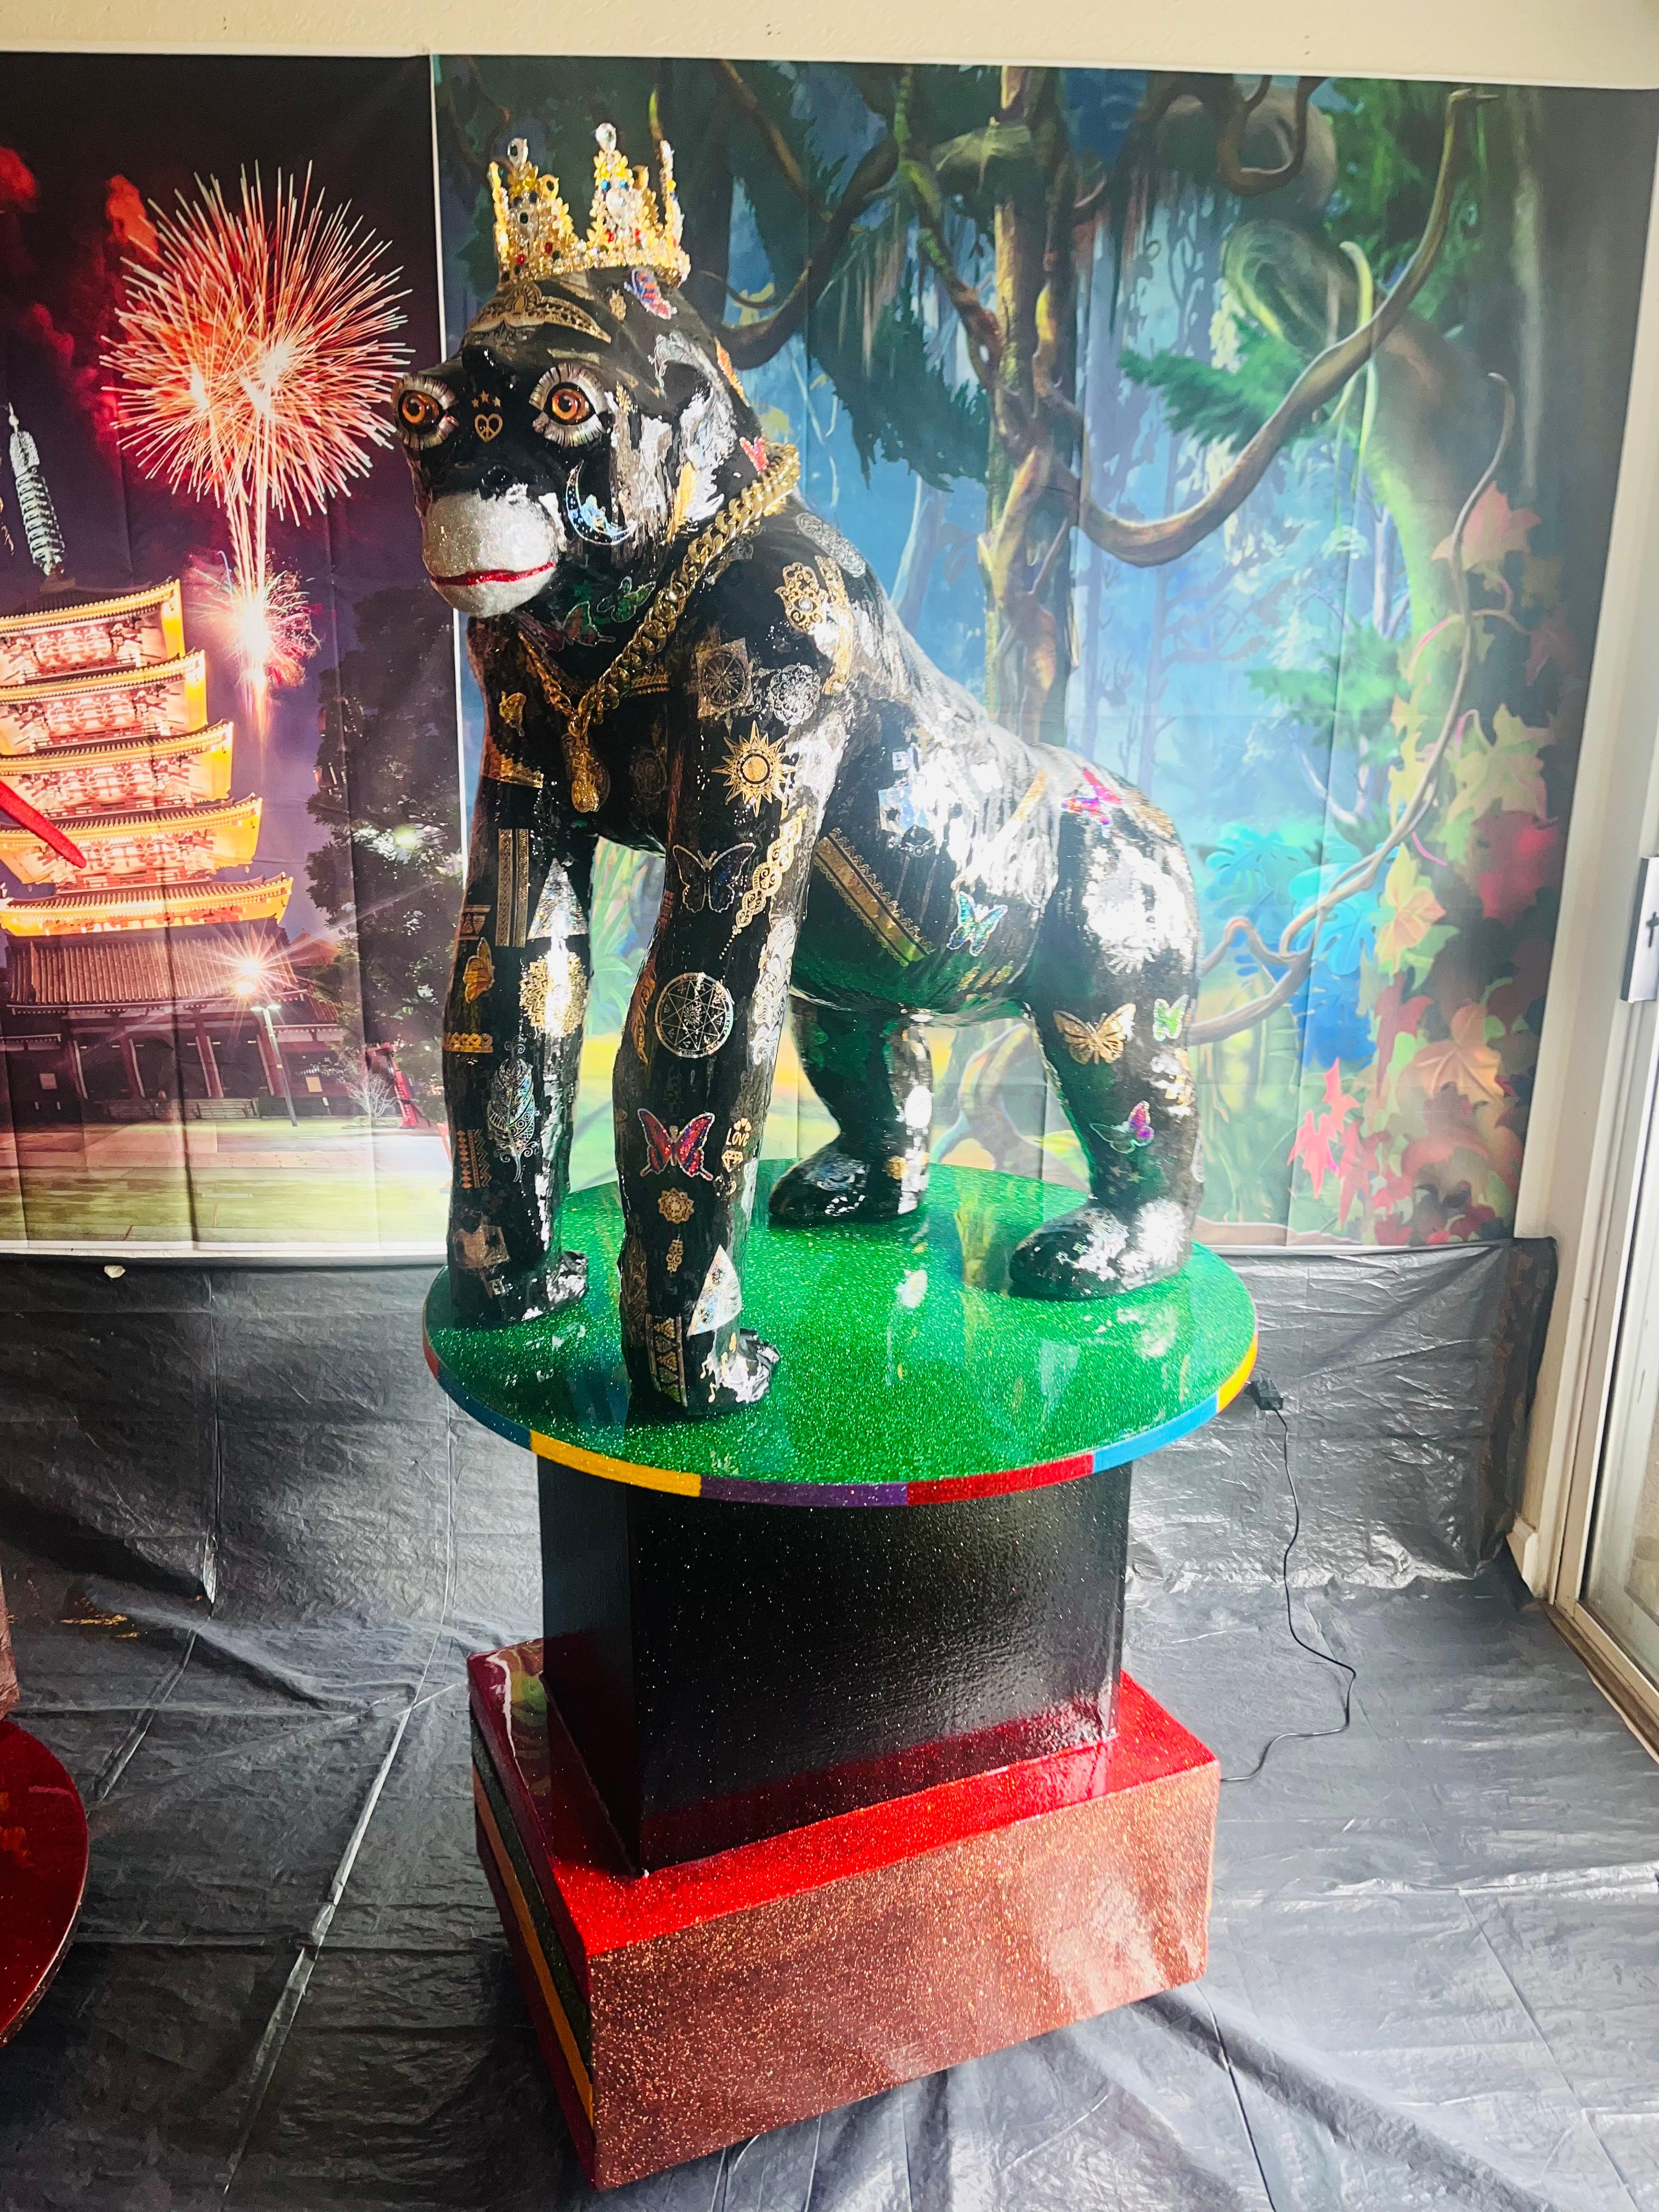               **ANNUAL SUPER SALE UNTIL MAY 15TH ONLY**
*This Price Won't Be Repeated Again This Year-Take Advantage Of It*

Absolutely and positively one of a kind Gorilla Sculpture masterpiece.

There will never be another one like it.

This is a